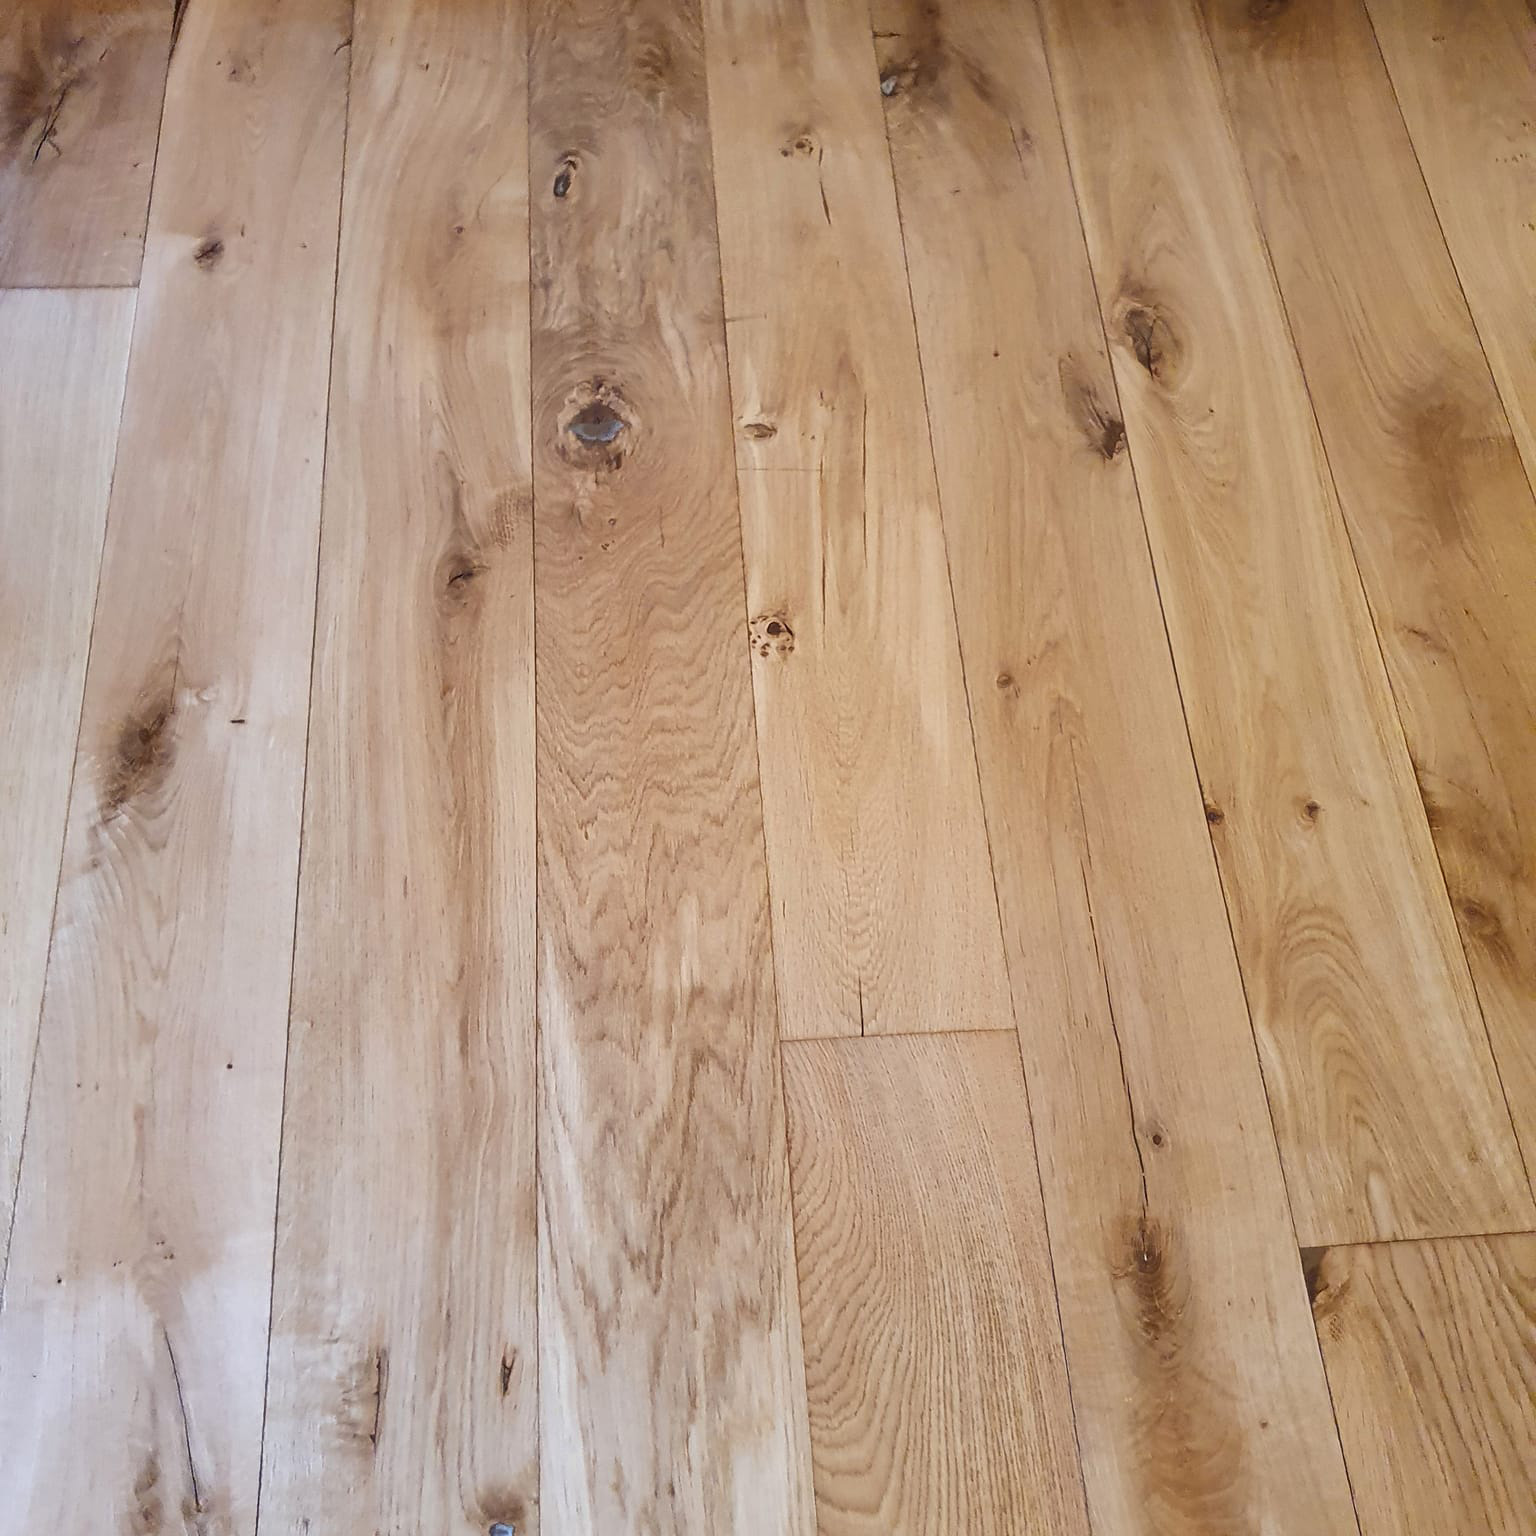 Hard wood floor that has been sanded and polished